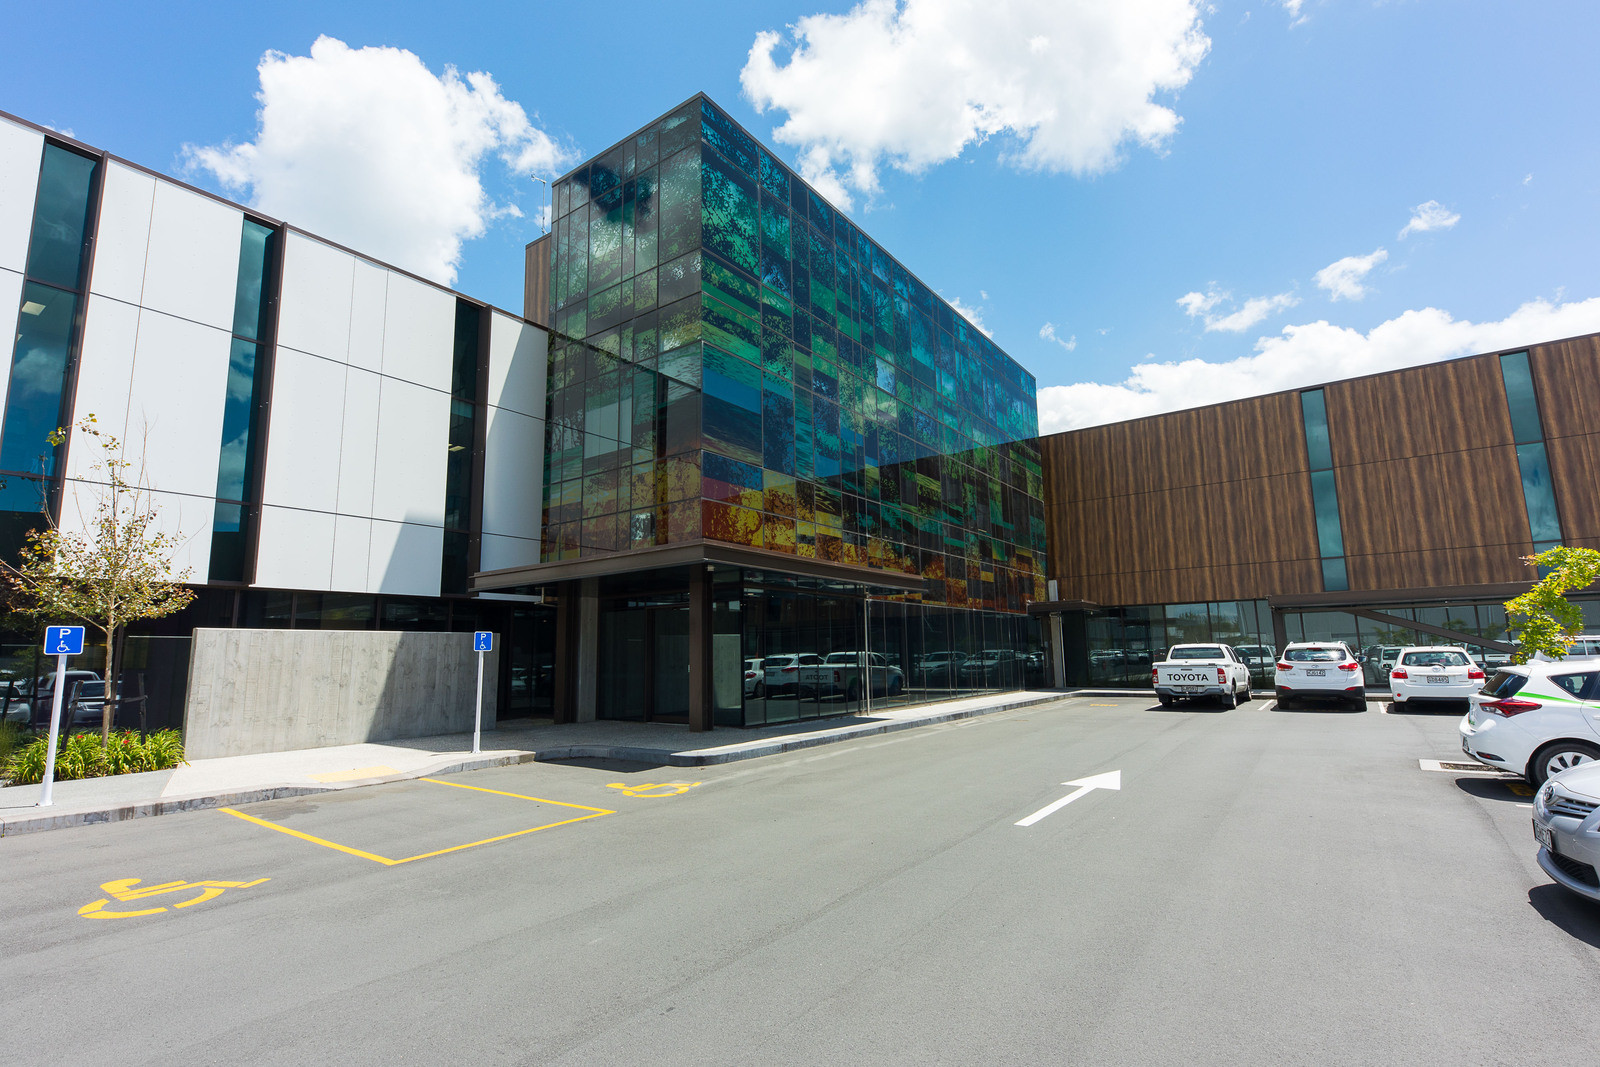 Large building with patterned glass exterior contrasting with wooden and white panels